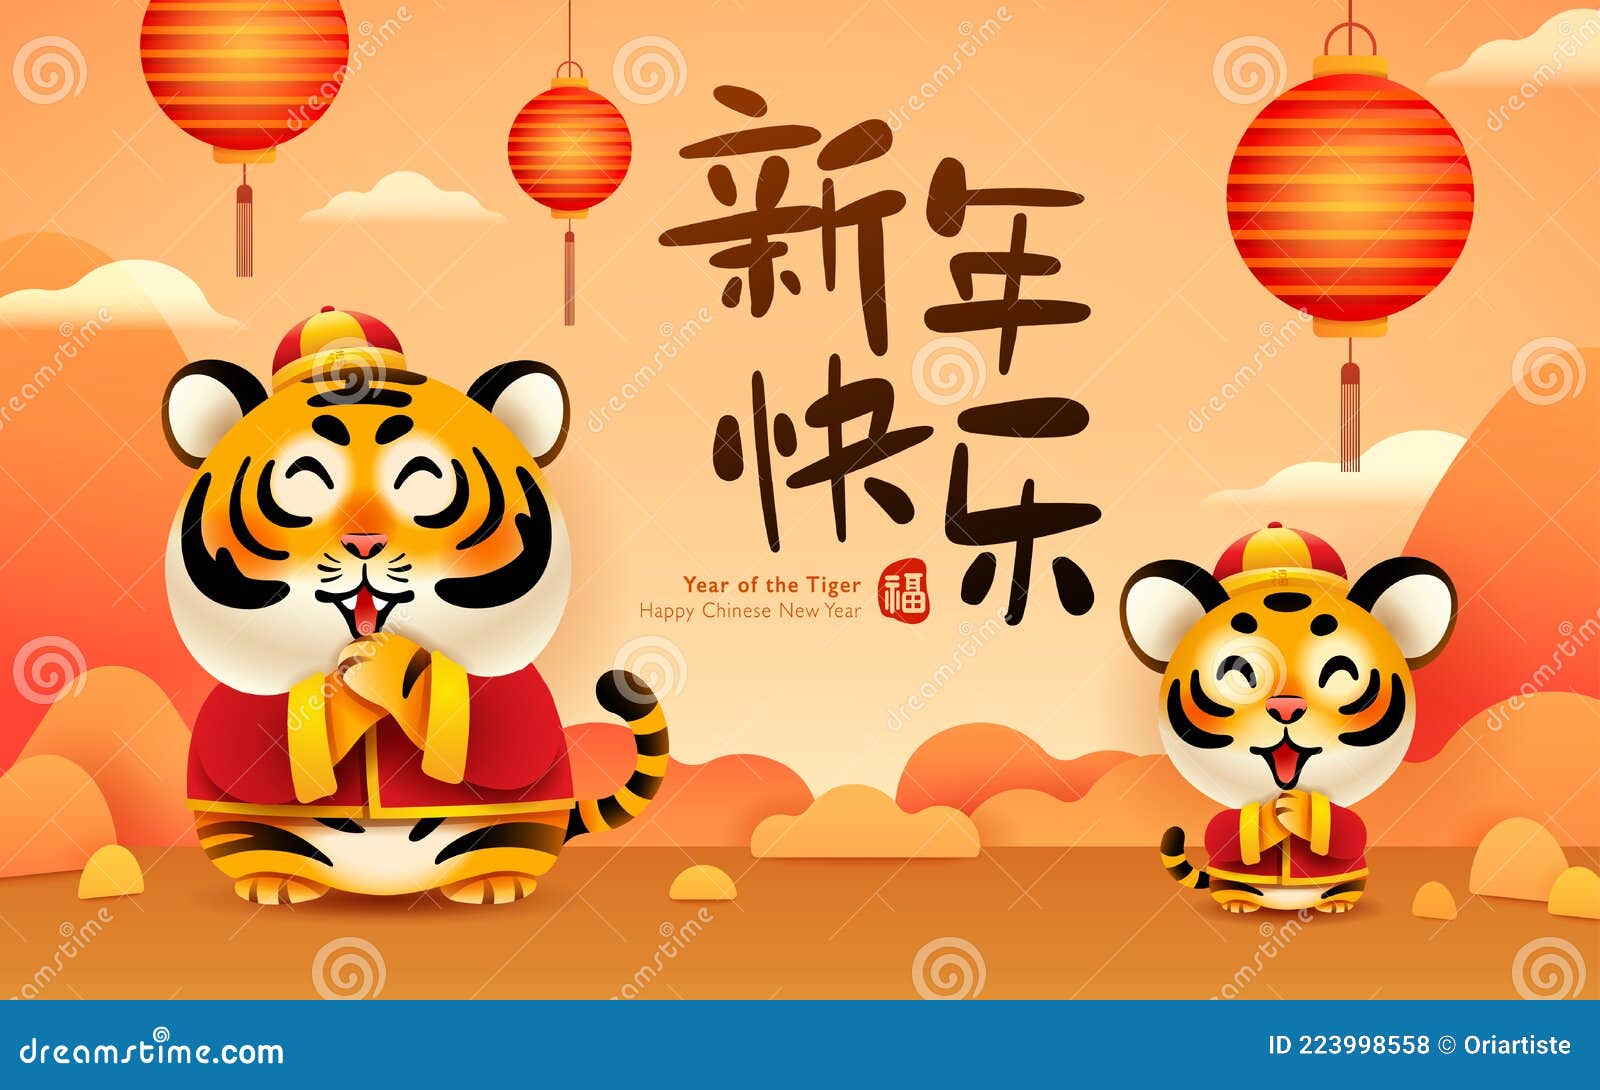 Cute Tiger on Oriental Festive Theme Background. Happy Chinese New Year  2022. Year of the Tiger Stock Vector - Illustration of festive, animal:  223998558